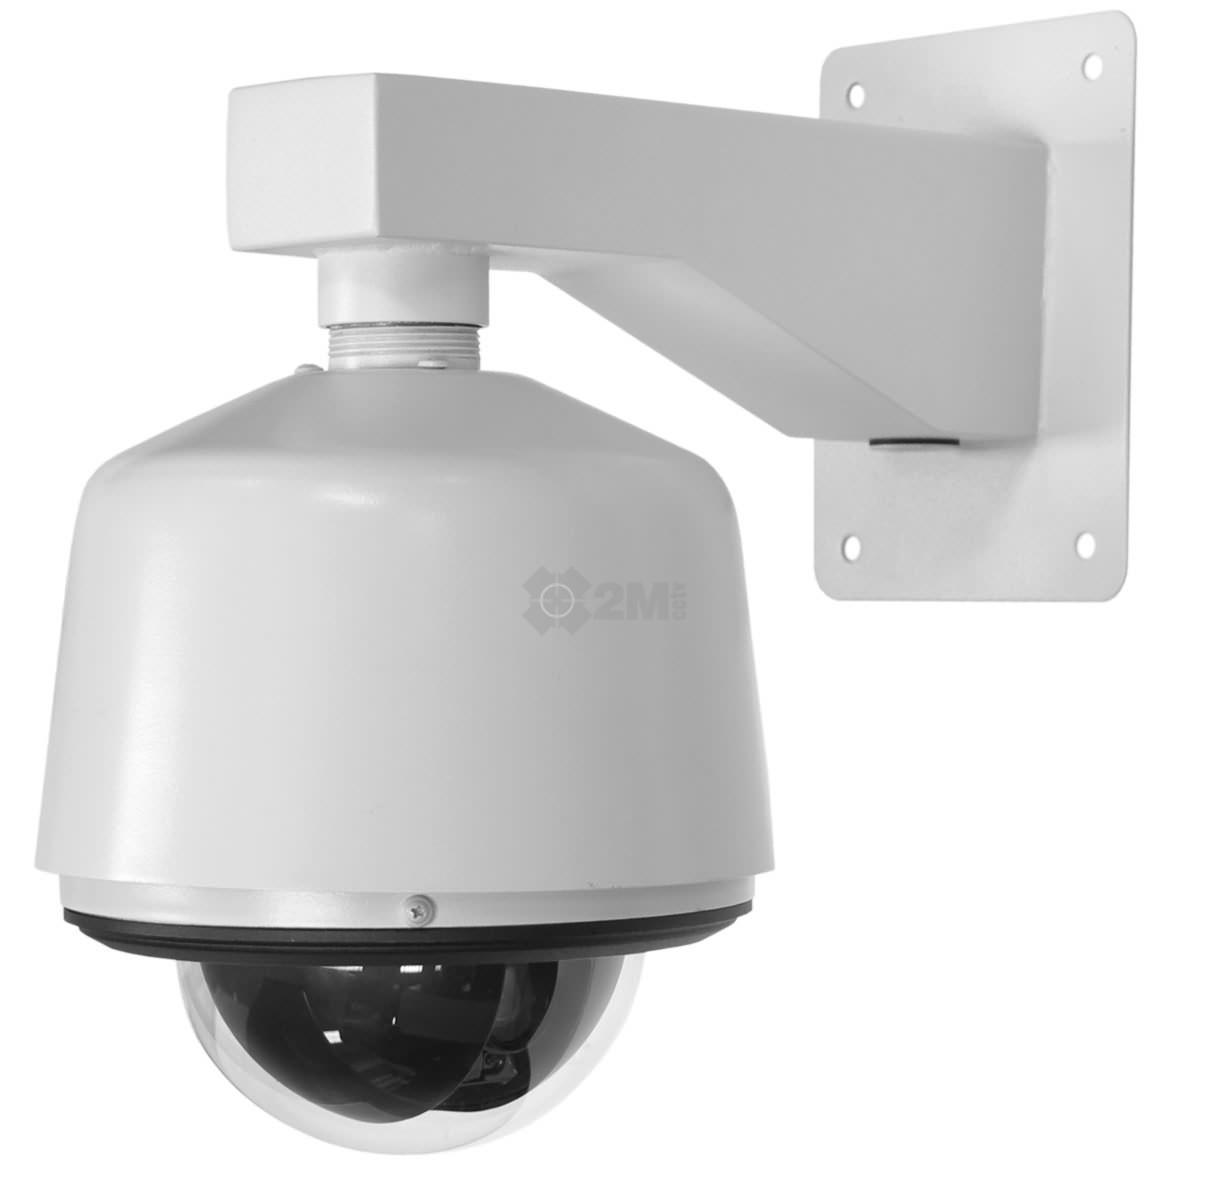 Please contact Eamon McNulty for all your home security Tel: 01322 521030 or click here Thank you